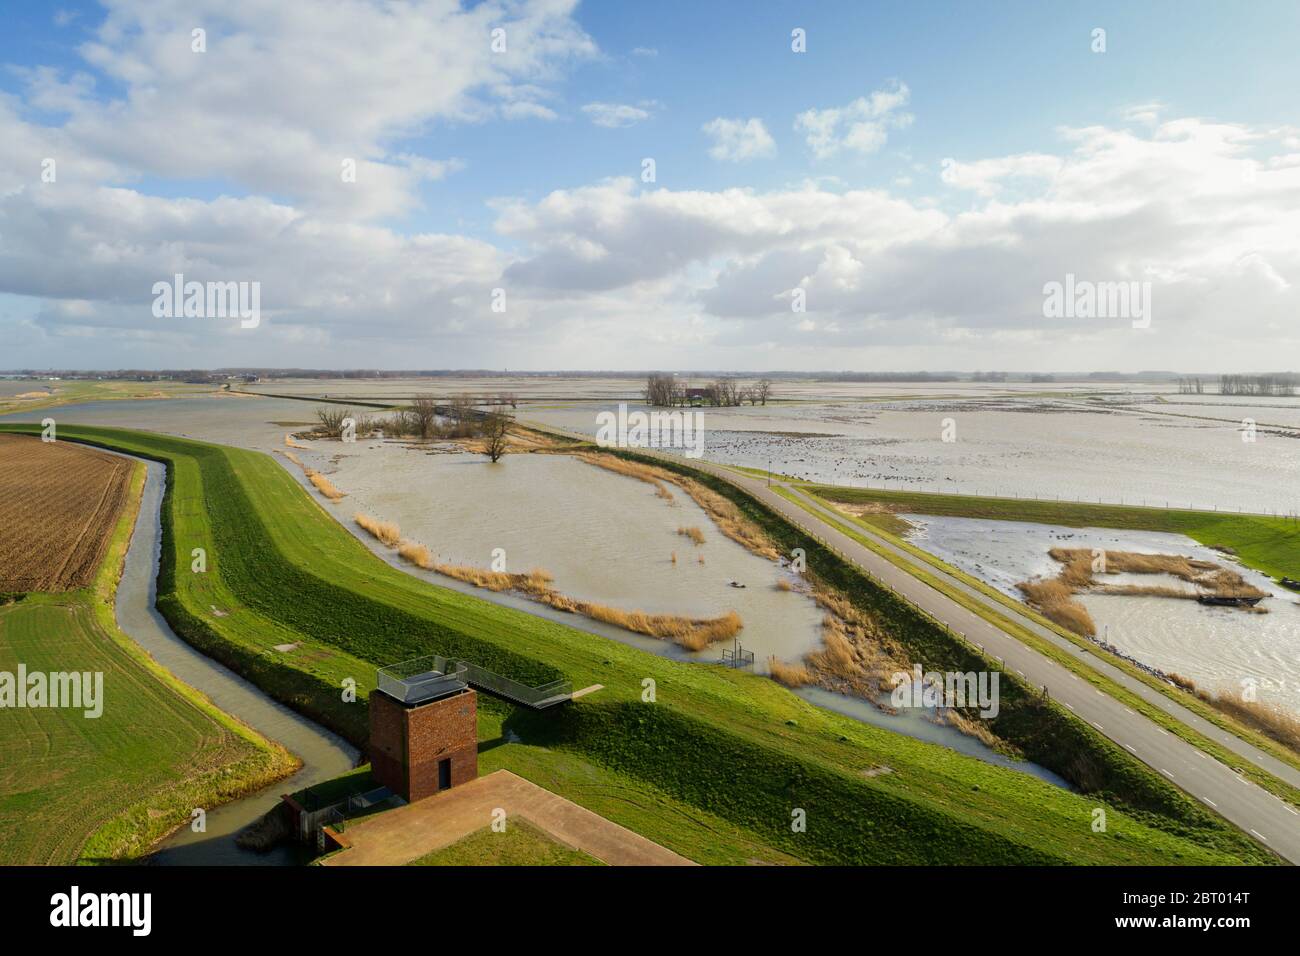 Aerial view of Wadden Sea and a road along a dyke in Friesland, The Netherlands. Stock Photo